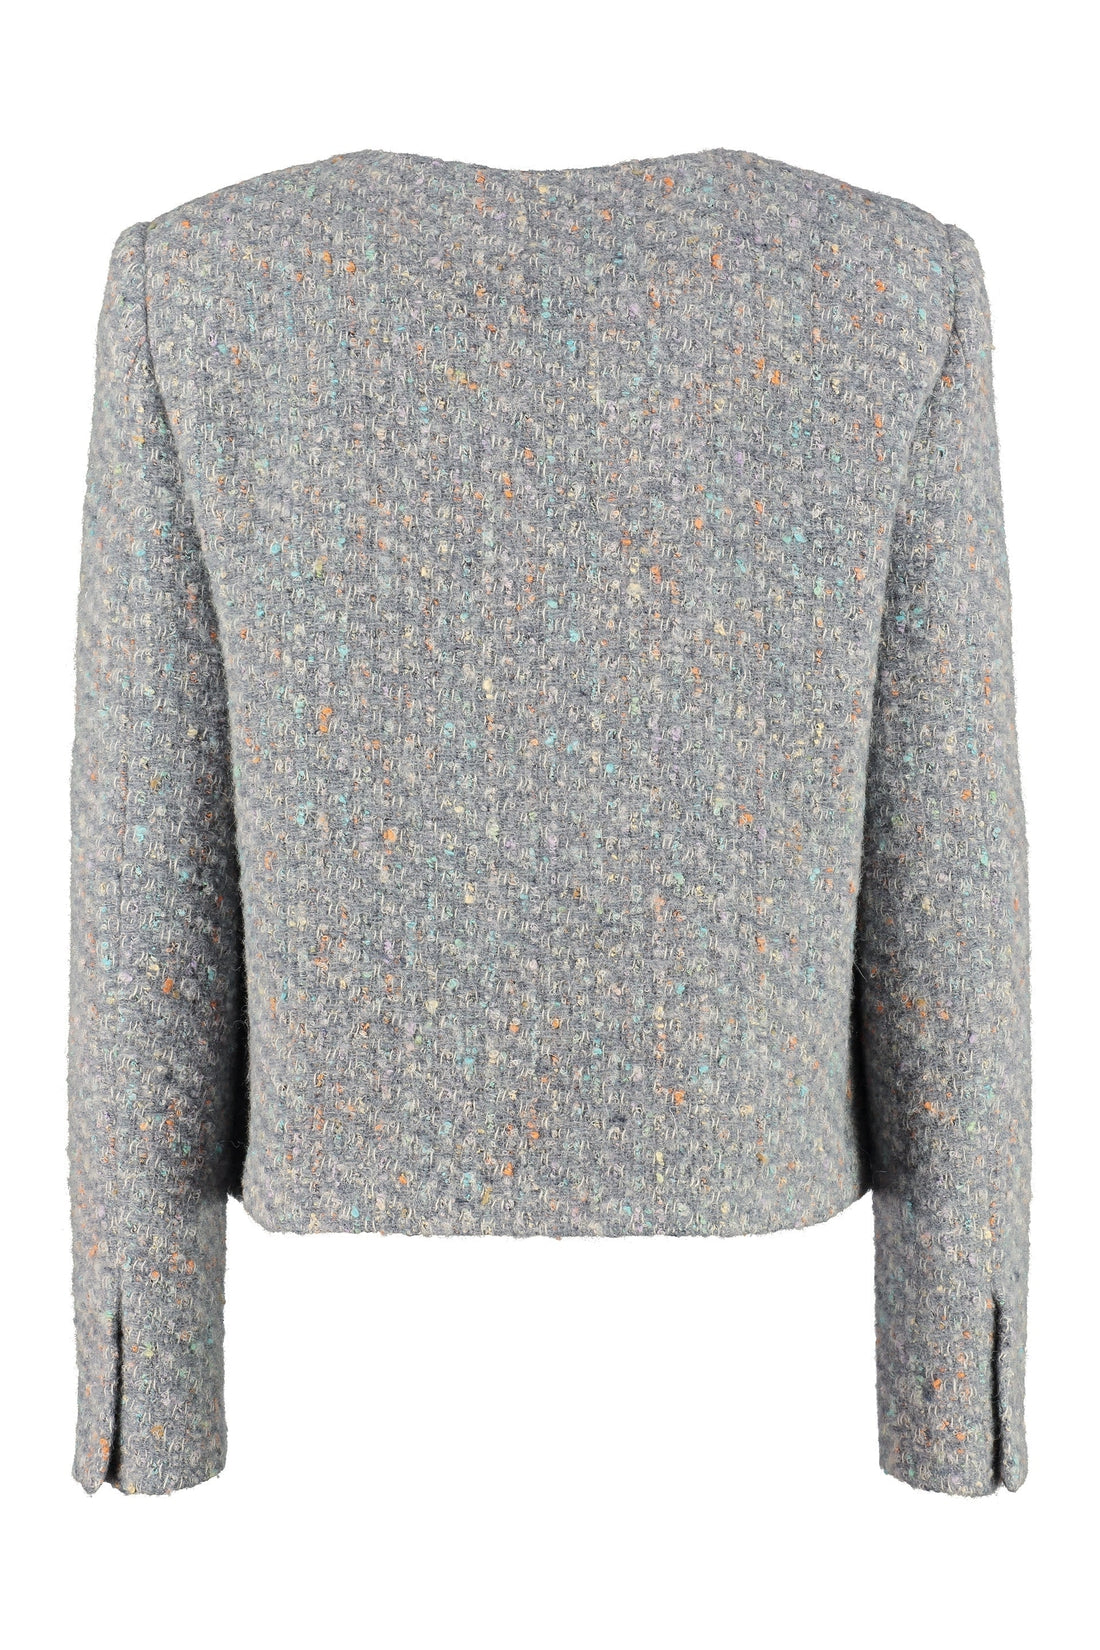 Moschino-OUTLET-SALE-Boucle wool jacket-ARCHIVIST